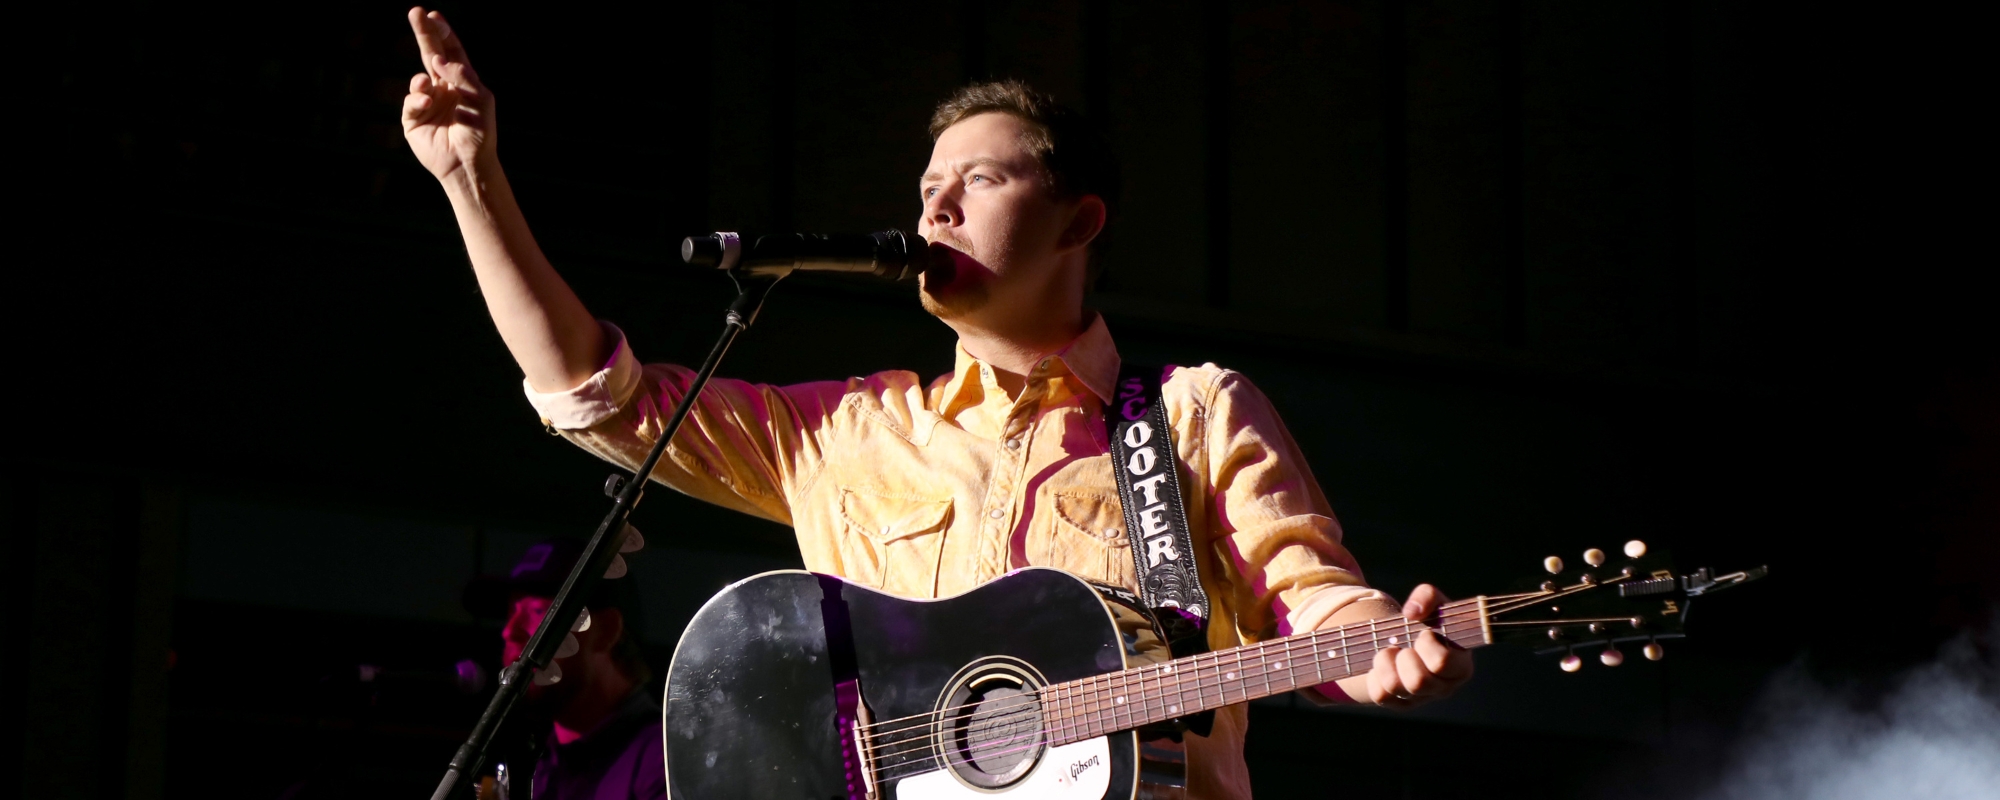 Scotty McCreery Prepares For Opry Induction, Fifth Album ‘Rise and Fall’: Exclusive